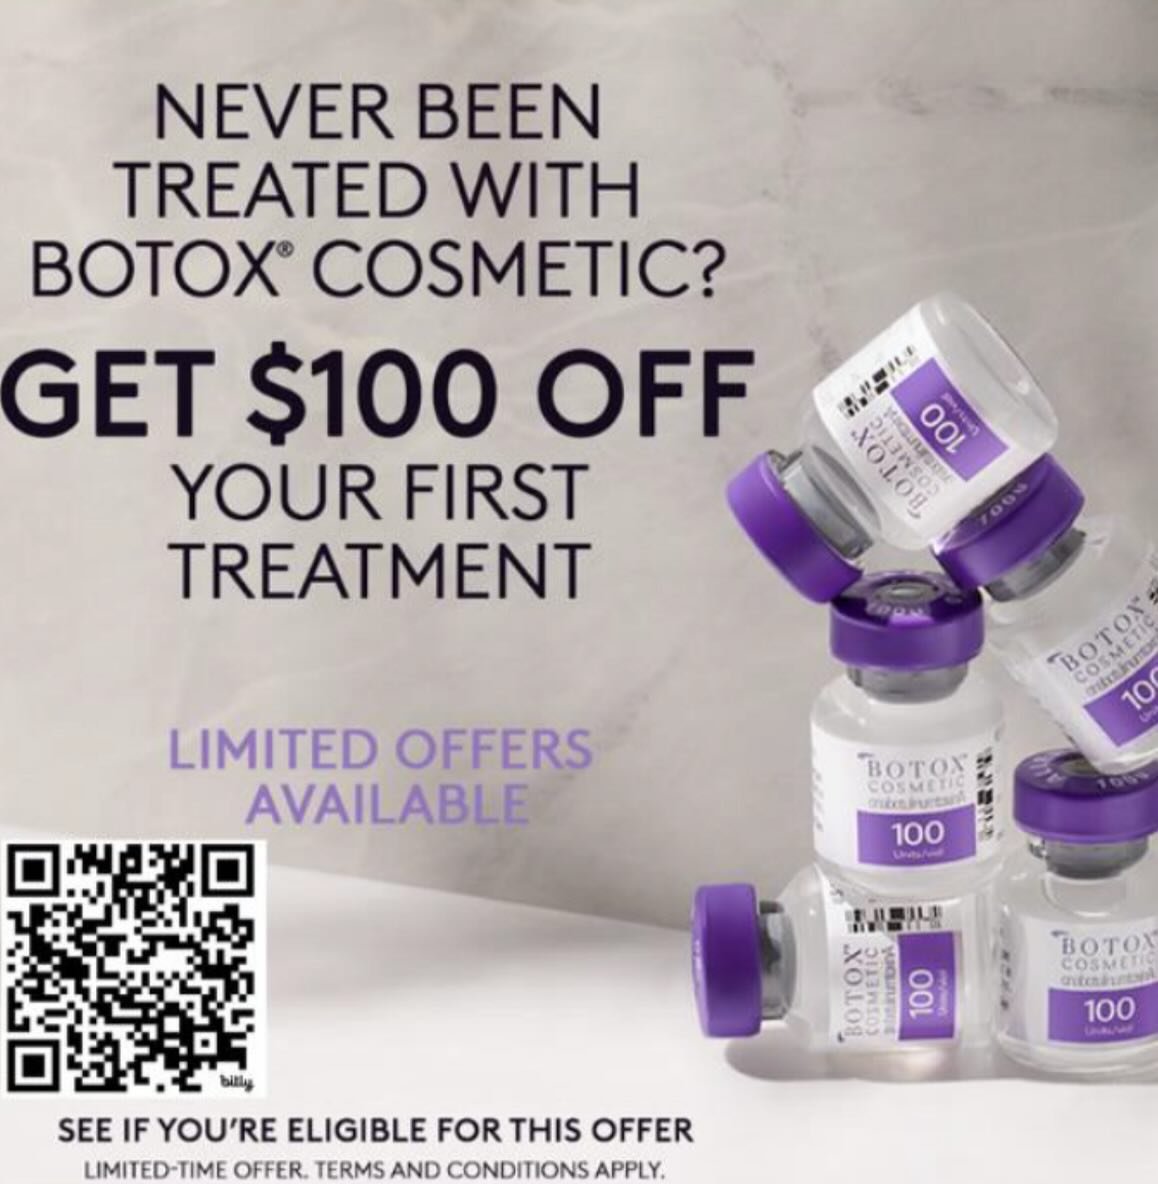 Alle&rsquo;s new Botox Offer: $100 off for new to Botox patients! 

👉🏻Scan the QR code above &amp; claim offer
👉🏻Must be an Alle member to claim
👉🏻Offer is available for immediate use
👉🏻Offer expires 90 days after issue date into Alle Wallet
